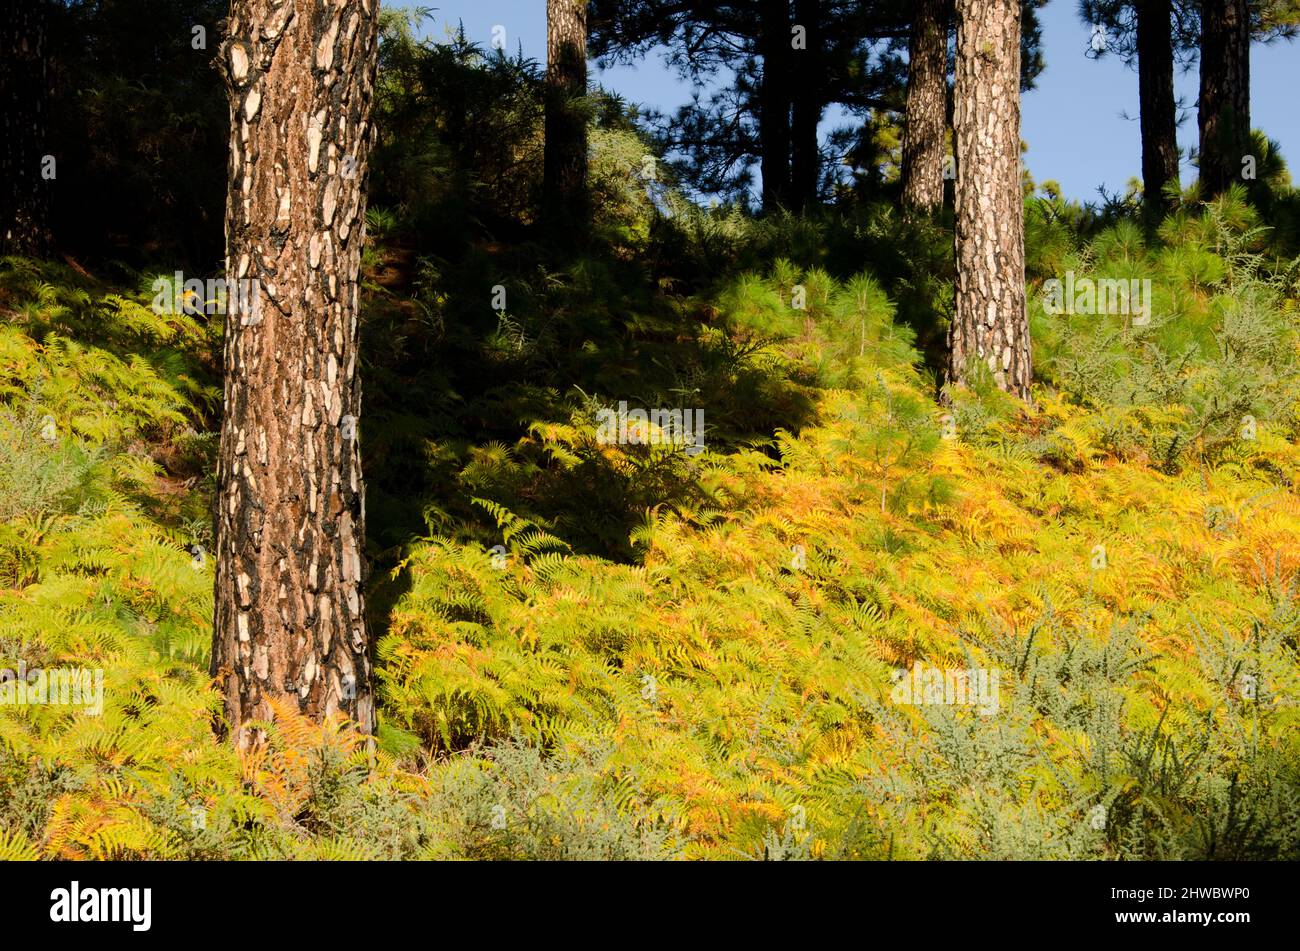 Forest of Canary Island pine Pinus canariensis and undergrowth of bracken ferns and Canary Island flatpod. La Palma. Canary Islands. Spain. Stock Photo